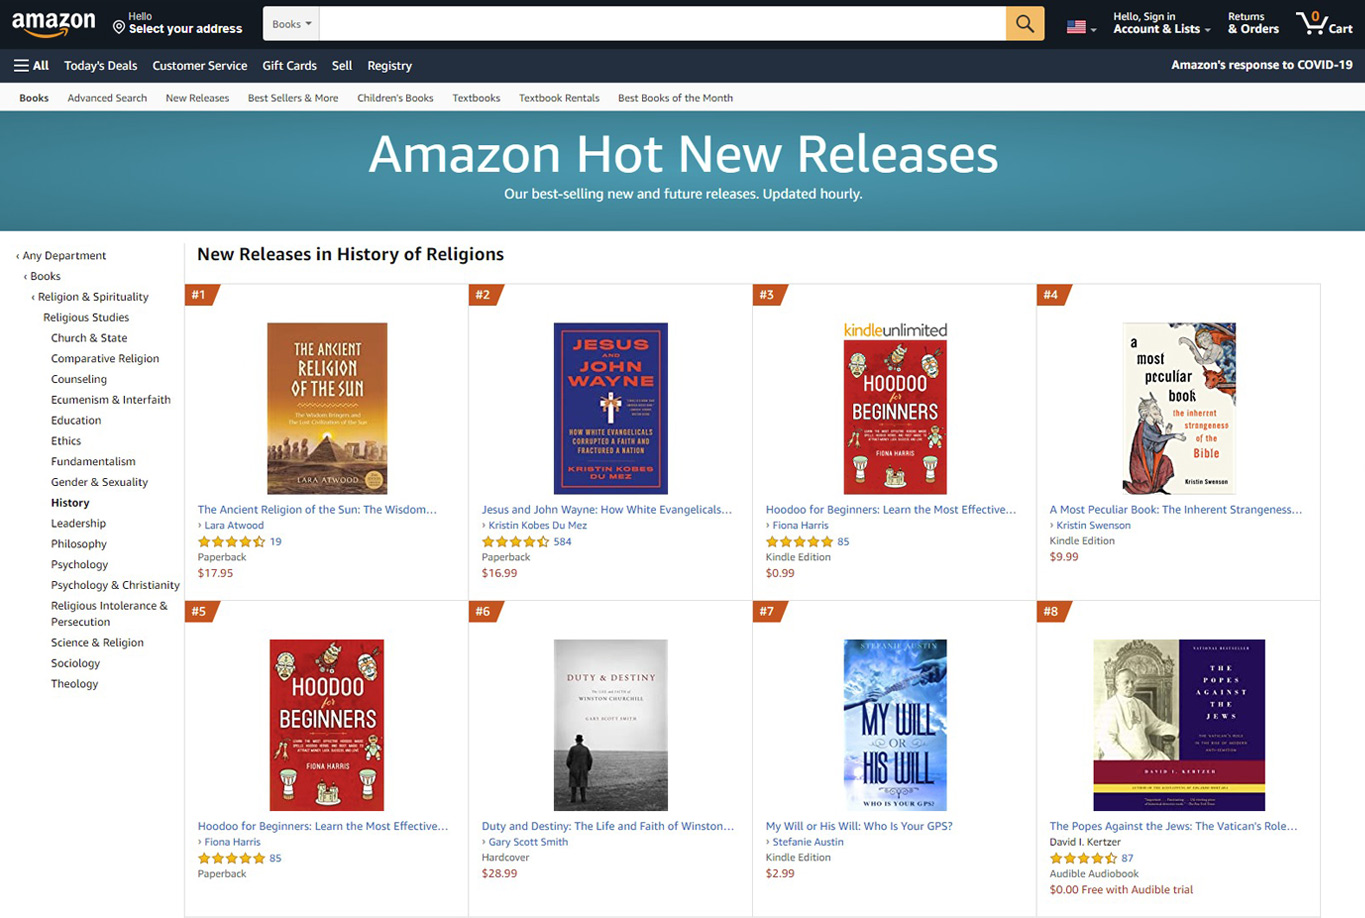 The Ancient Religion of the Sun book in the Amazon New Releases History of Religion bestseller list